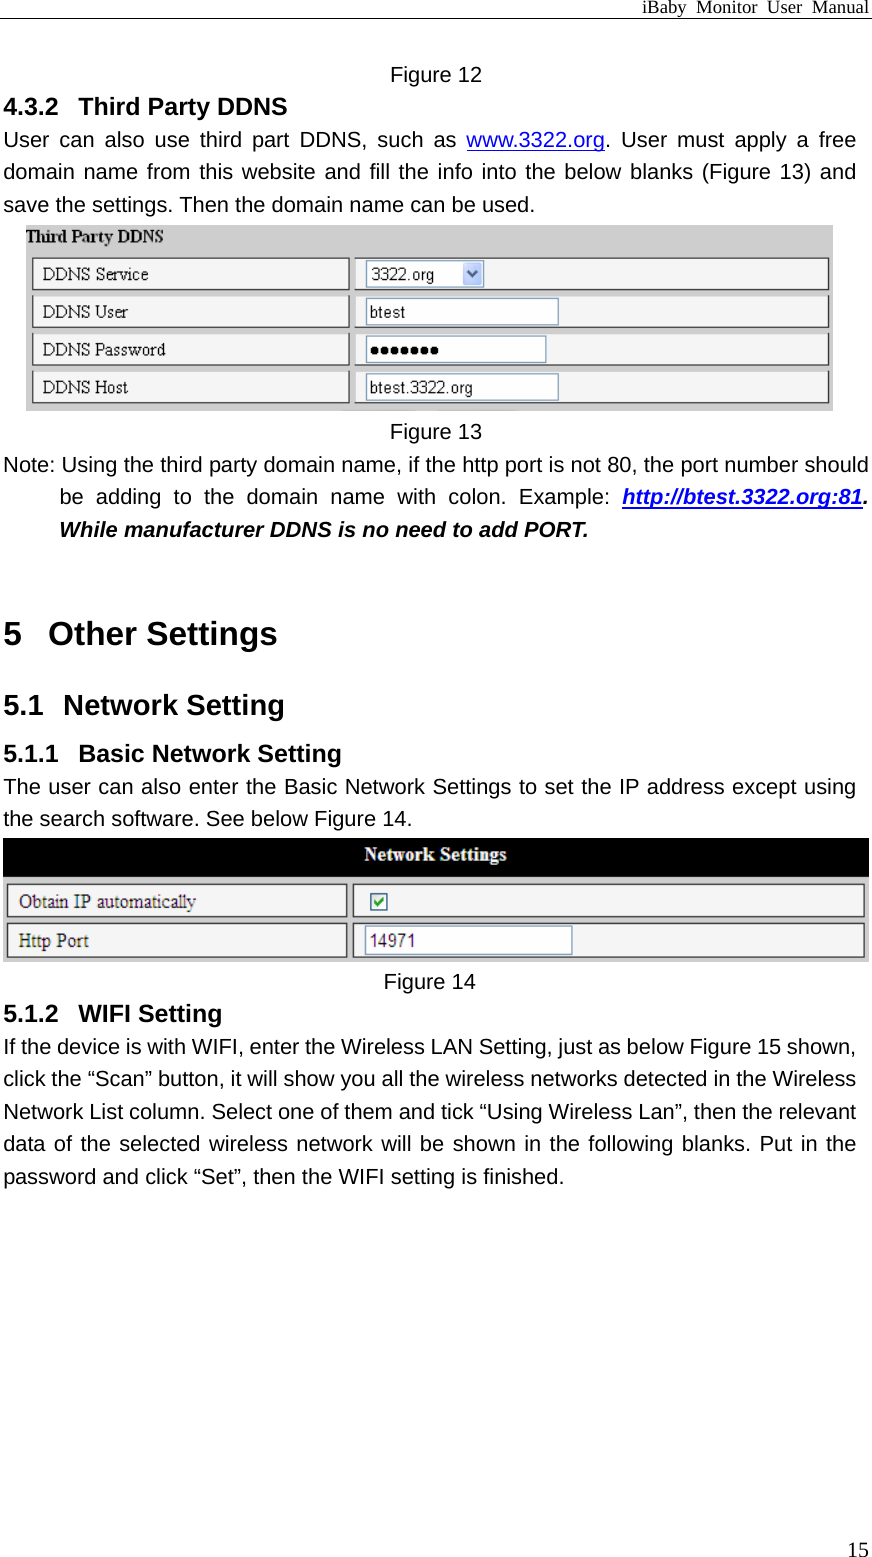 iBaby Monitor User Manual Figure 12 4.3.2  Third Party DDNS User can also use third part DDNS, such as www.3322.org. User must apply a free domain name from this website and fill the info into the below blanks (Figure 13) and save the settings. Then the domain name can be used.  Figure 13 Note: Using the third party domain name, if the http port is not 80, the port number should be adding to the domain name with colon. Example: http://btest.3322.org:81. While manufacturer DDNS is no need to add PORT.  5  Other Settings 5.1  Network Setting 5.1.1  Basic Network Setting The user can also enter the Basic Network Settings to set the IP address except using the search software. See below Figure 14.  Figure 14 5.1.2  WIFI Setting If the device is with WIFI, enter the Wireless LAN Setting, just as below Figure 15 shown, click the “Scan” button, it will show you all the wireless networks detected in the Wireless Network List column. Select one of them and tick “Using Wireless Lan”, then the relevant data of the selected wireless network will be shown in the following blanks. Put in the password and click “Set”, then the WIFI setting is finished.  15